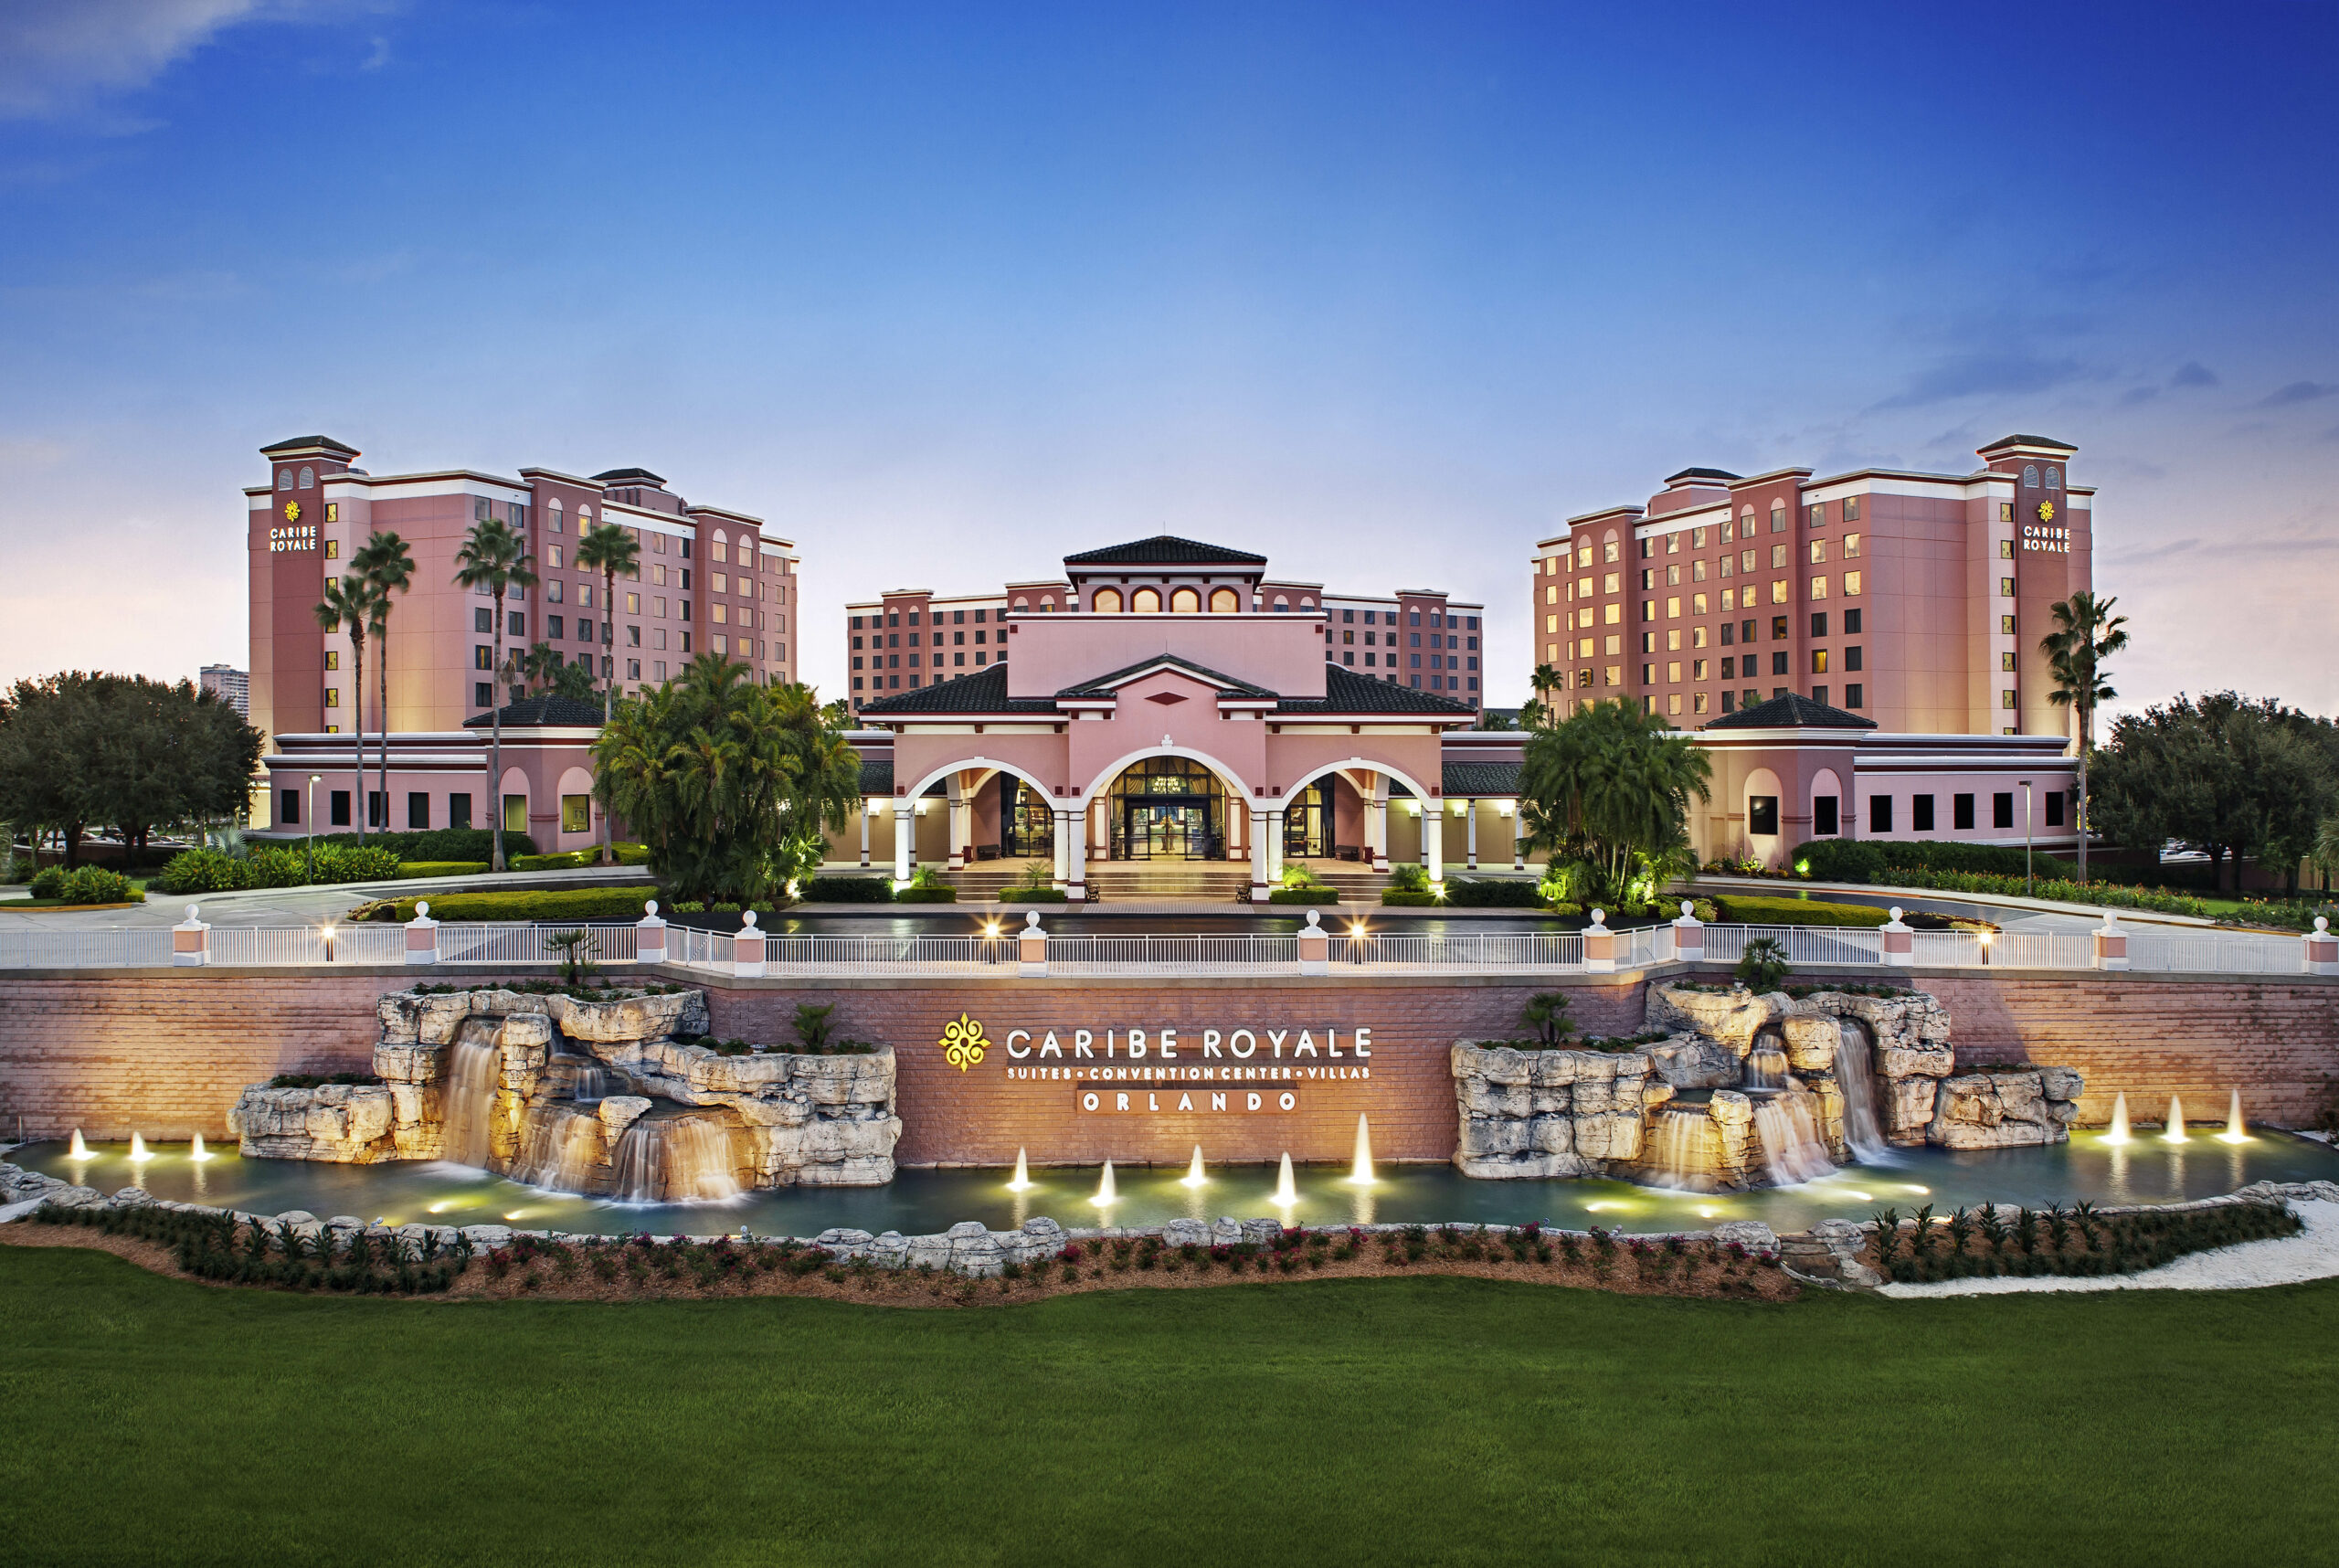 Save on a Summer Staycation Minutes from Walt Disney World Resort at Caribe Royale Orlando